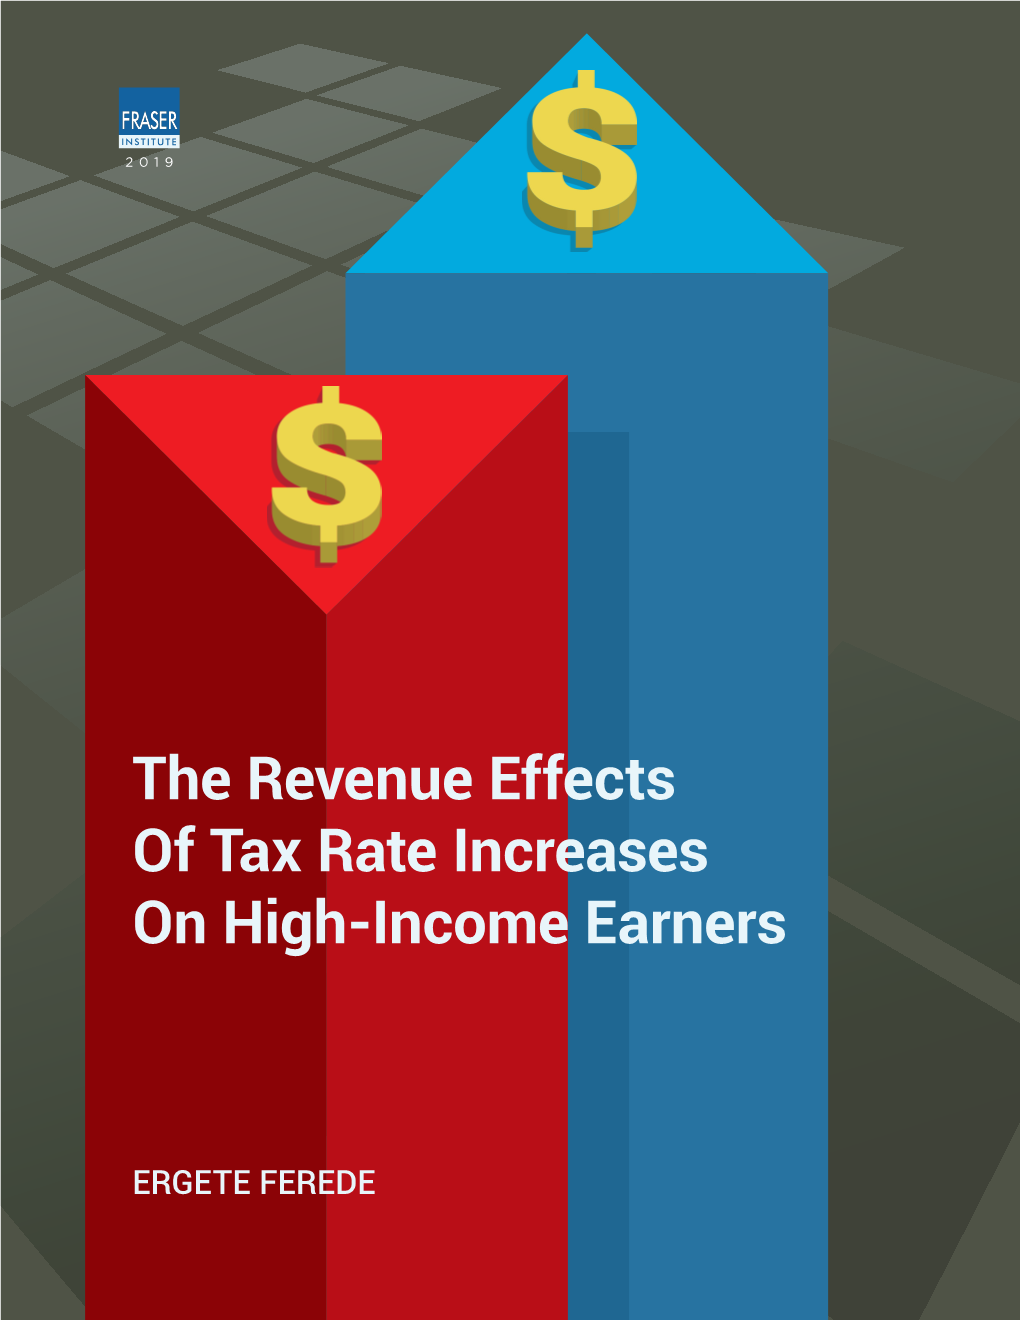 The Revenue Effects of Tax Rate Increases on High-Income Earners